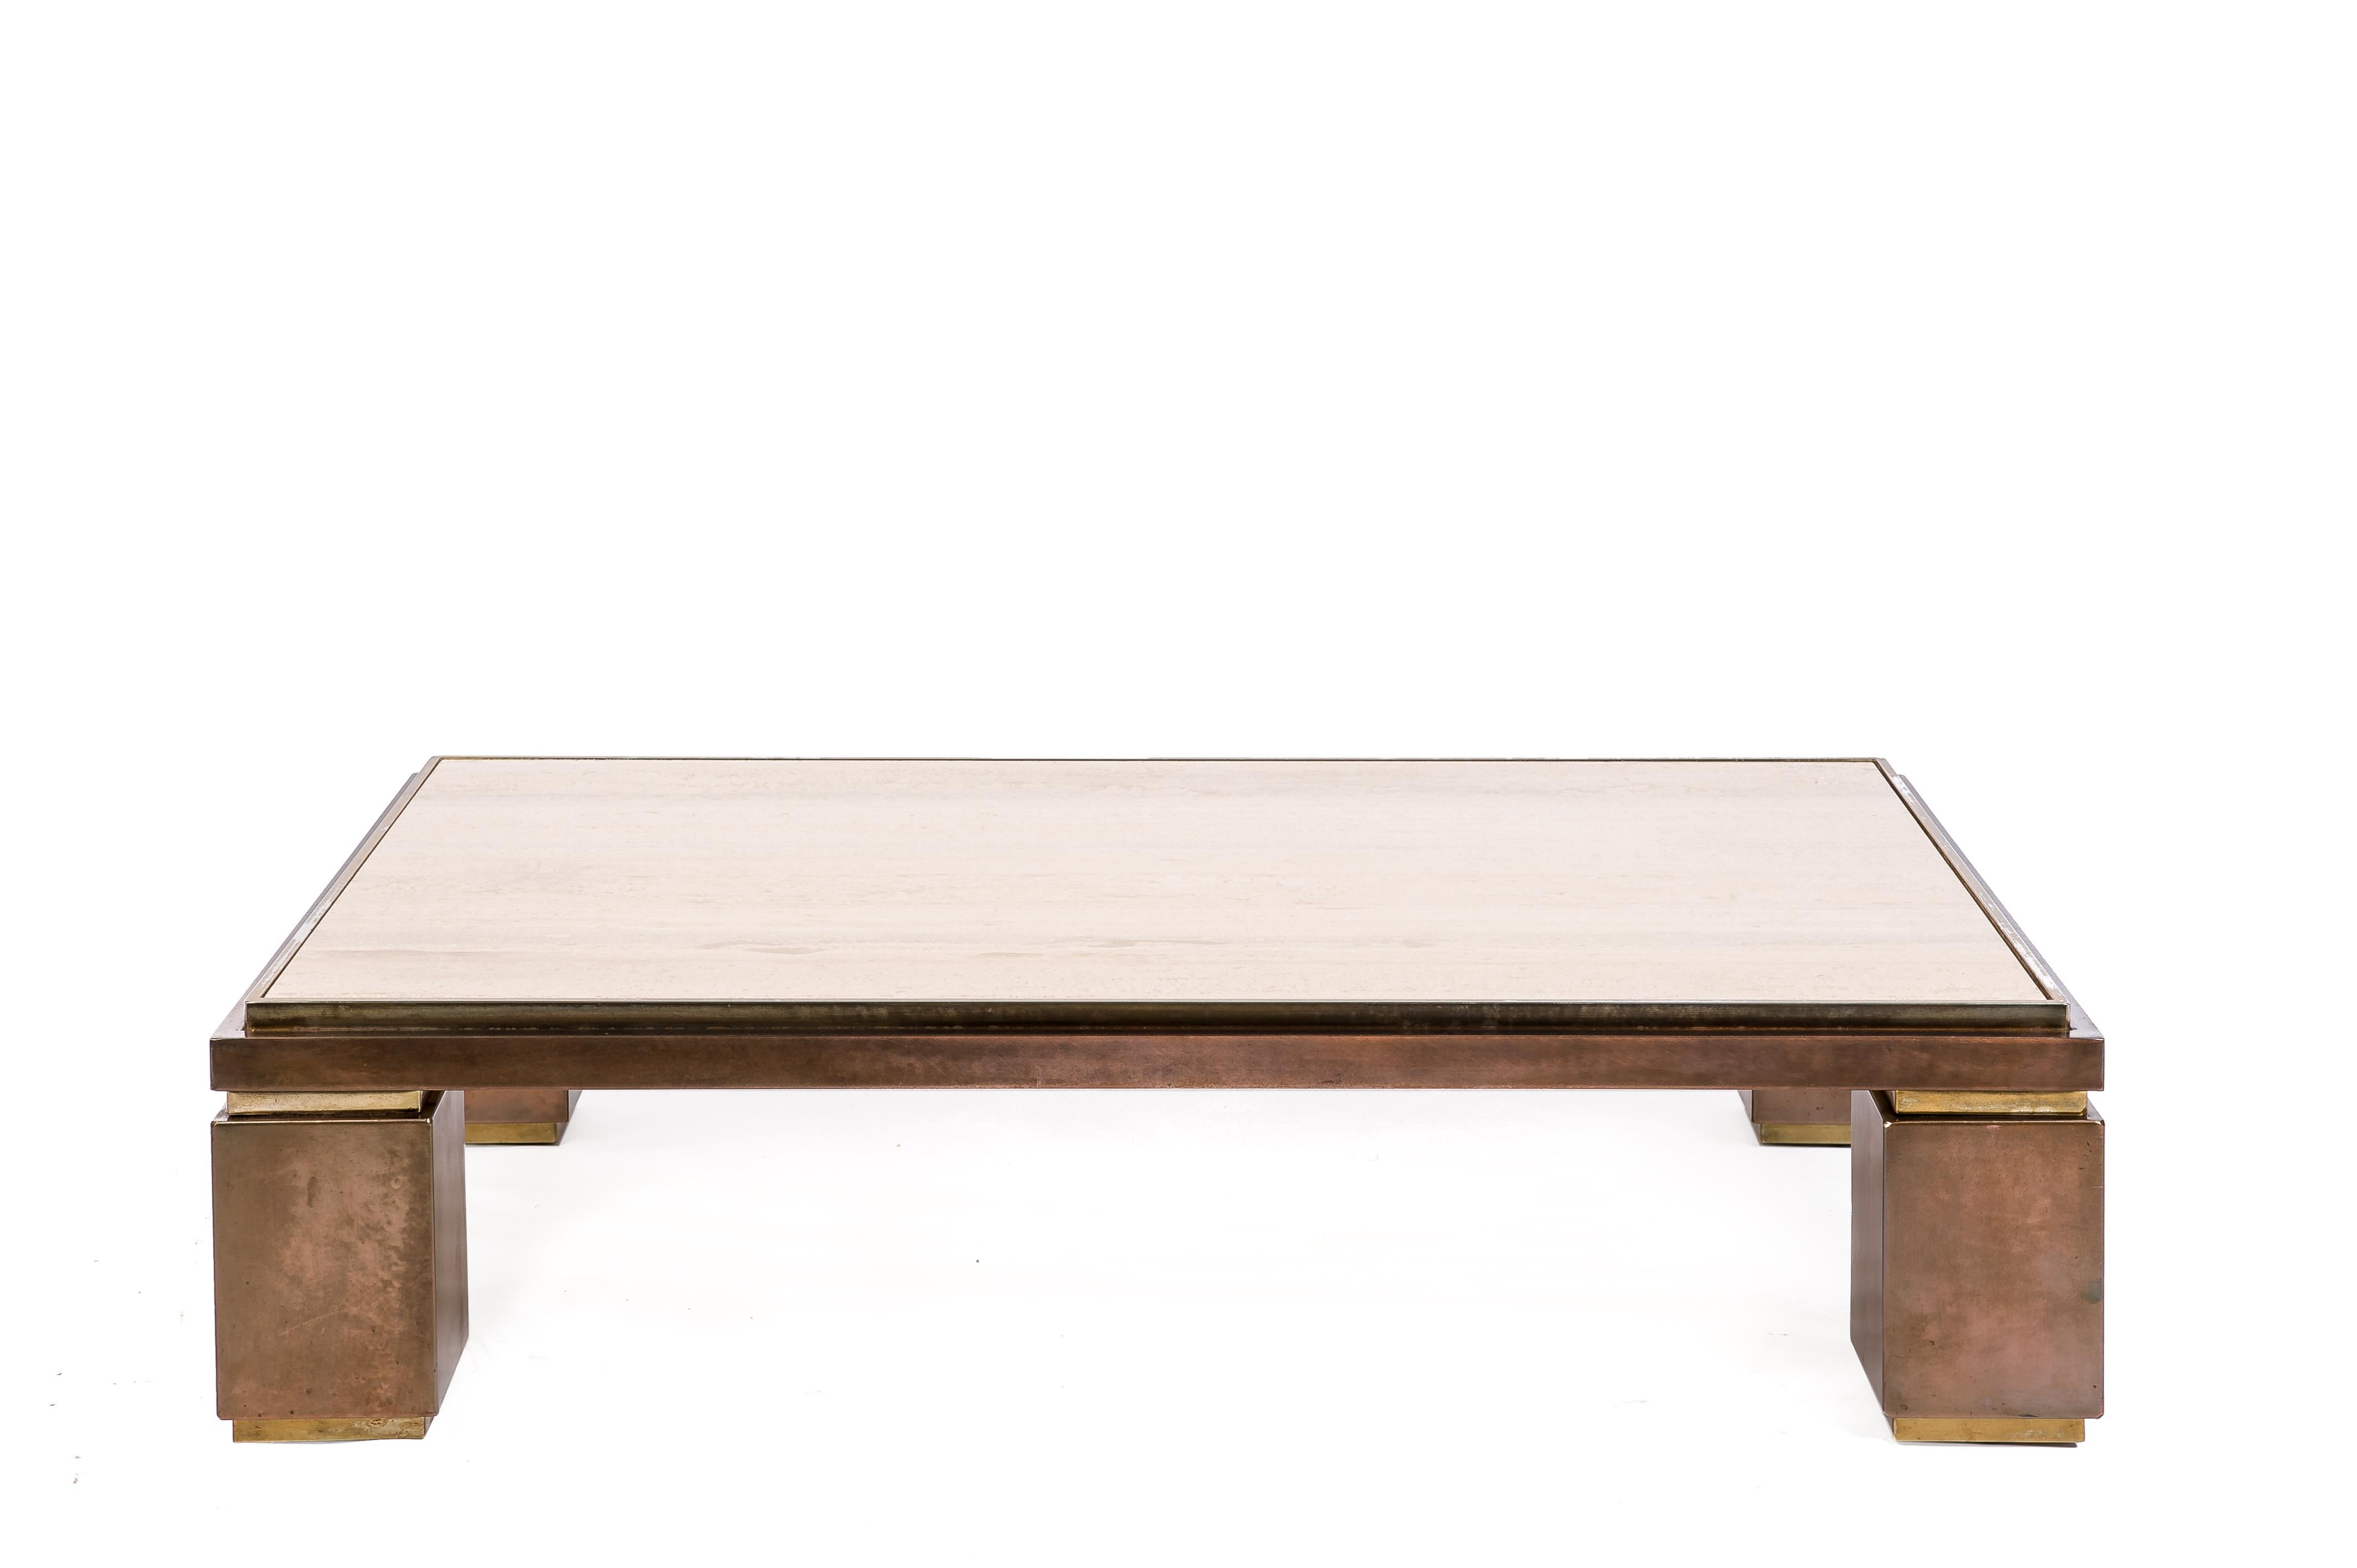 Gilt Hollywood Regency Travertine and Brass Coffee Table by Belgo Chrome, 1970s For Sale